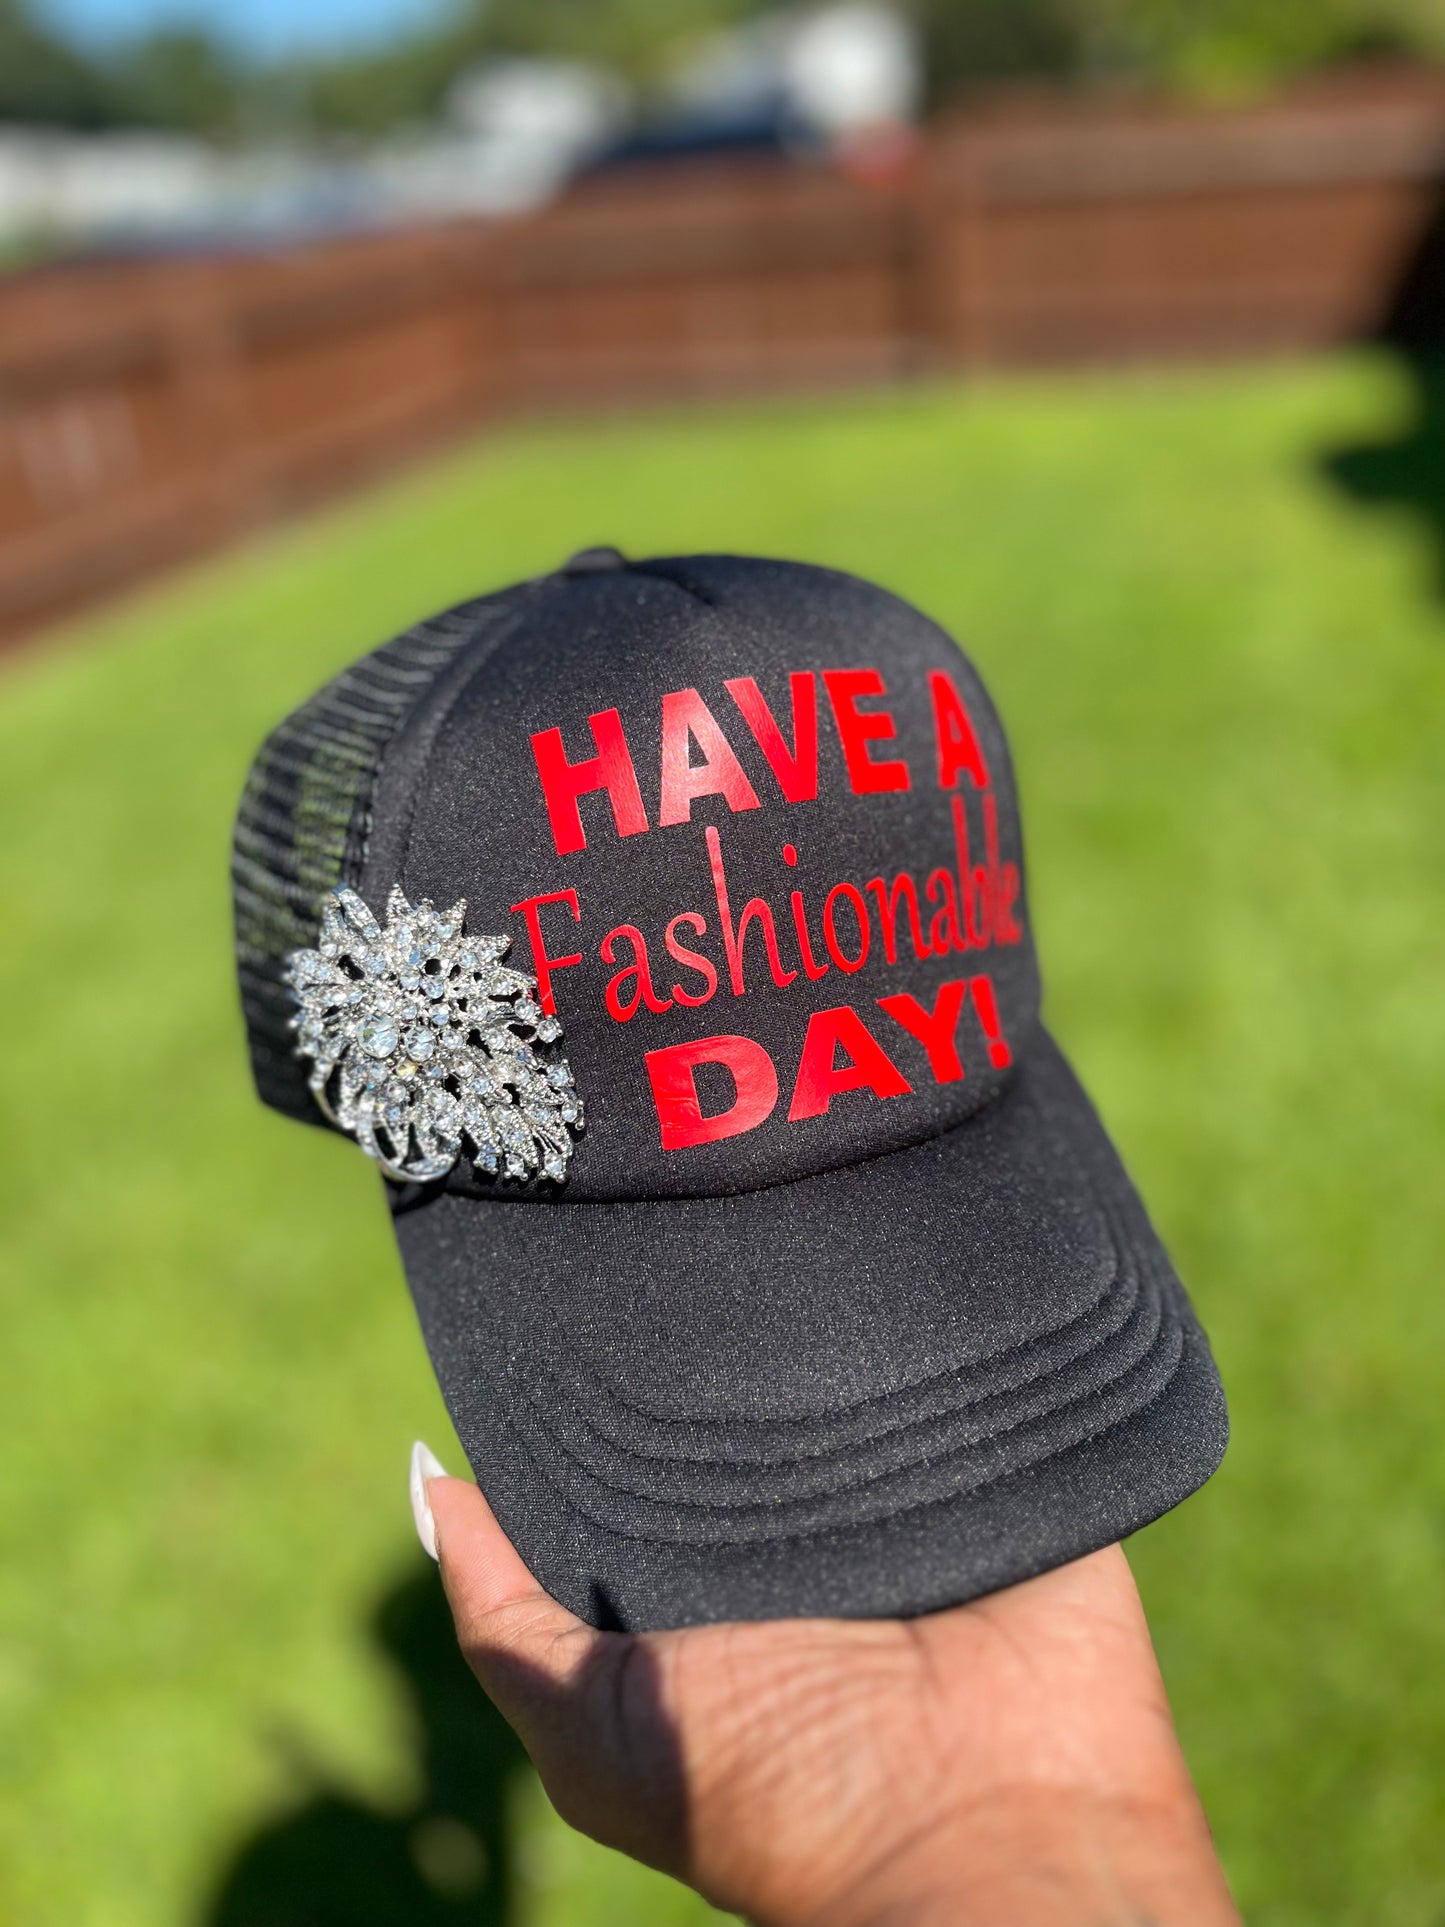 Have a fashionable day!